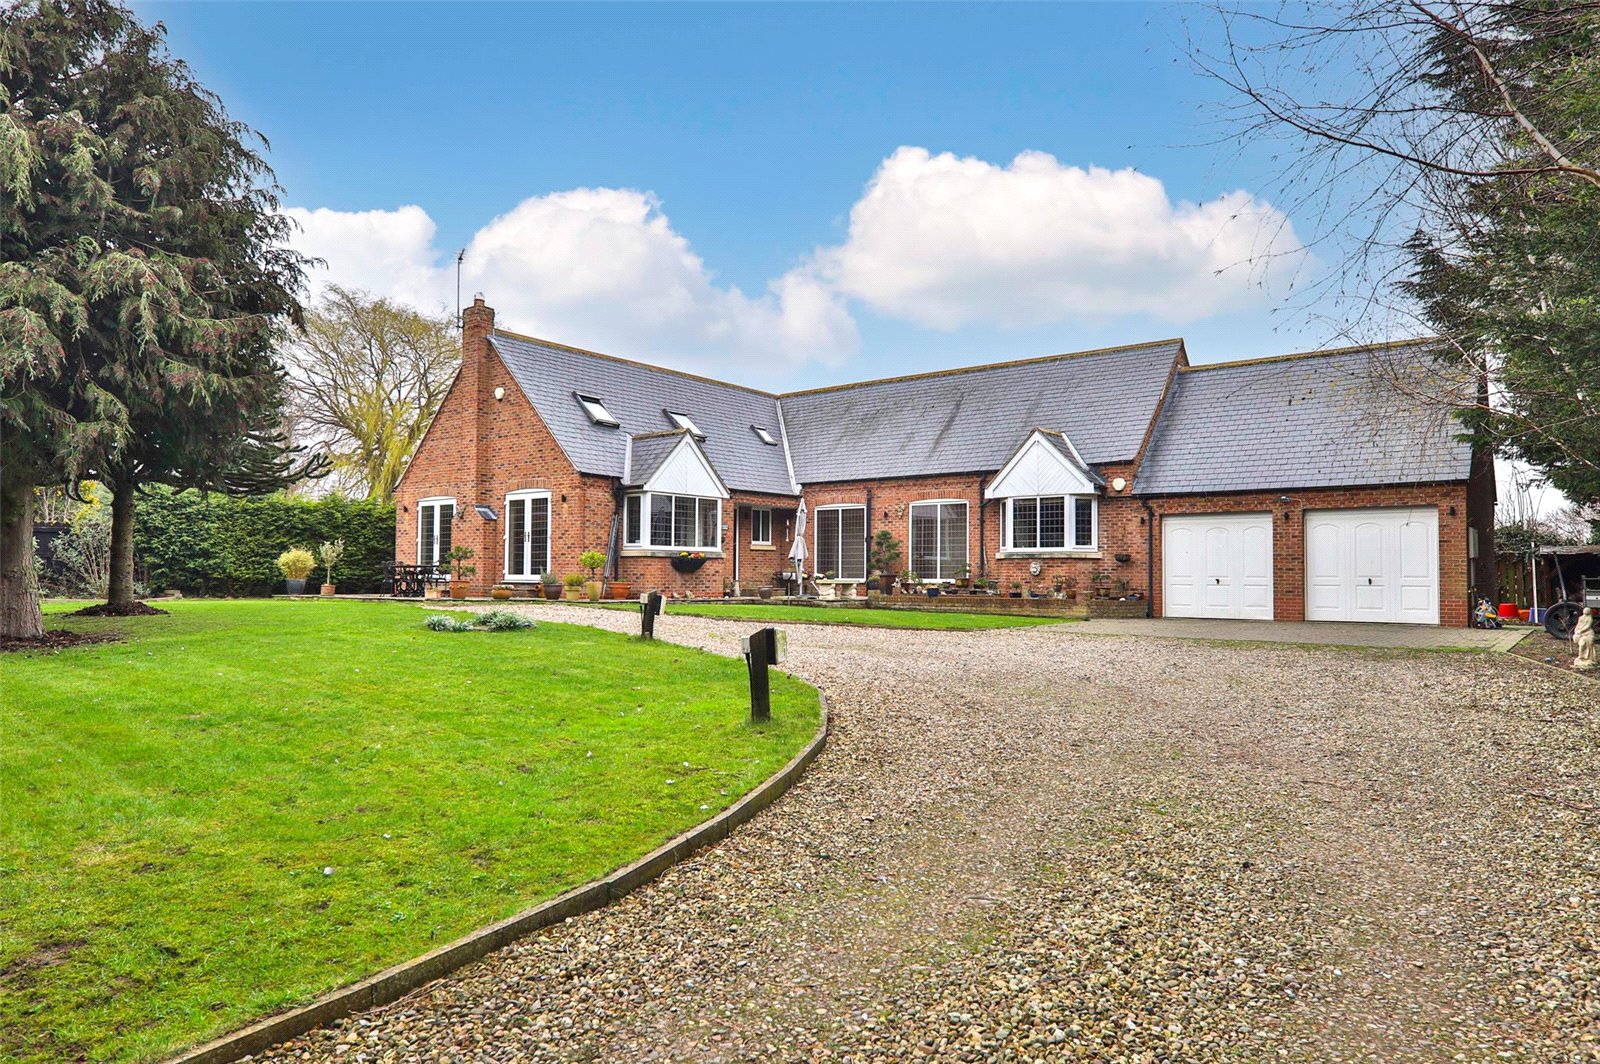 5 bed house for sale in Church Lane, Thorngumbald  - Property Image 1